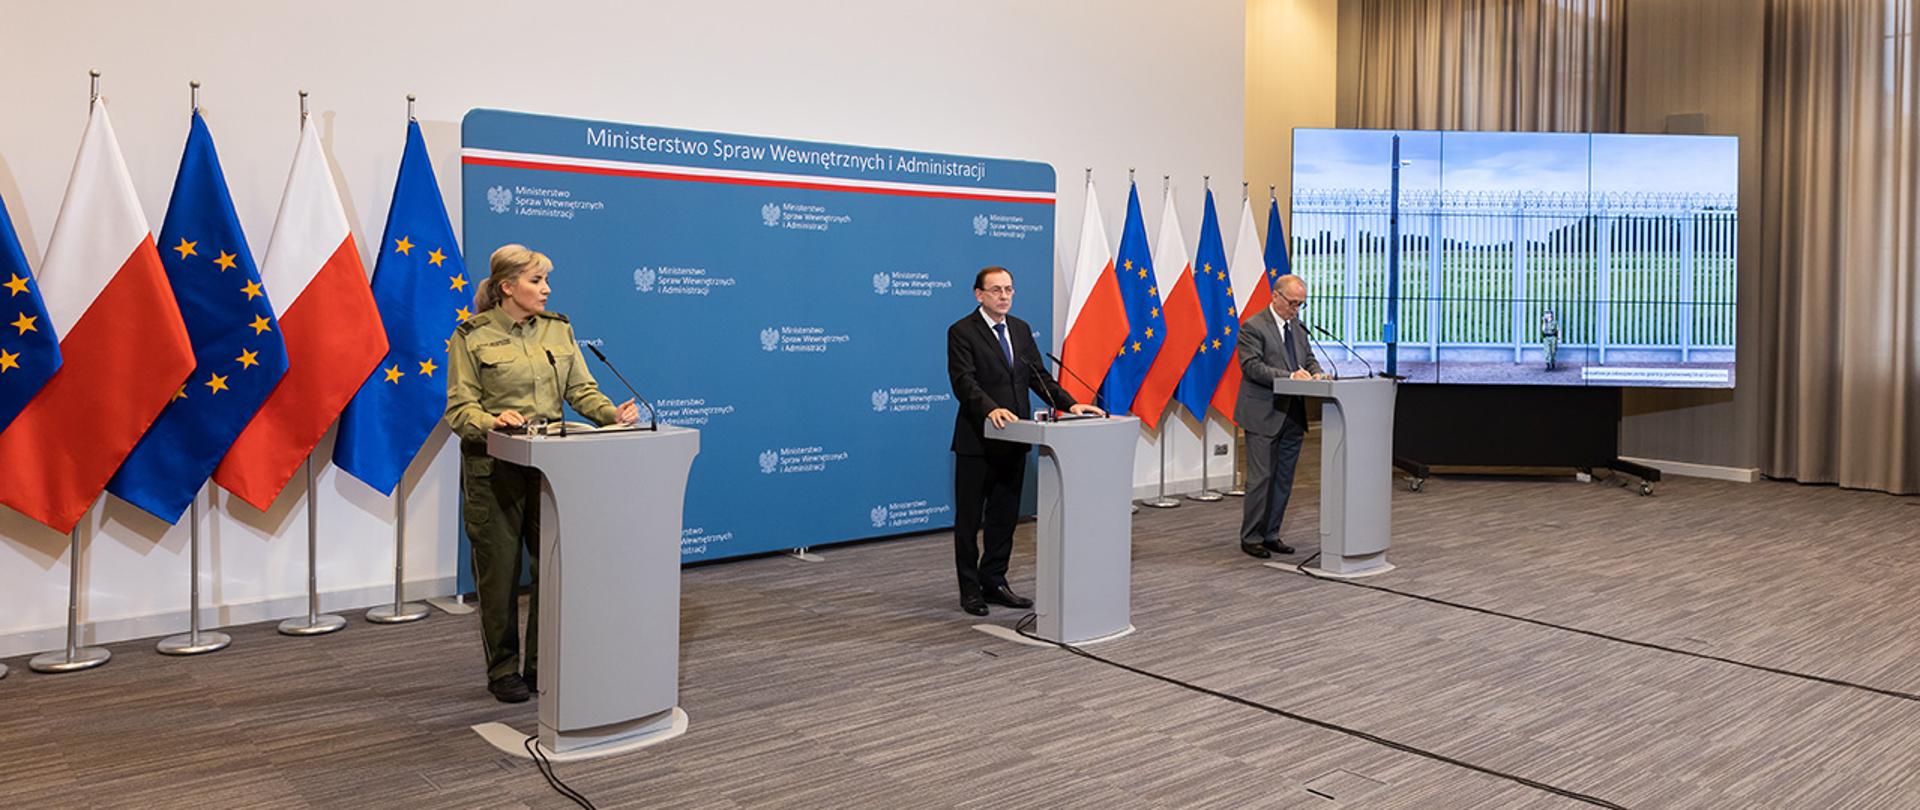 Minister Mariusz Kamiński provided details on the construction of a barrier on the border with Belarus